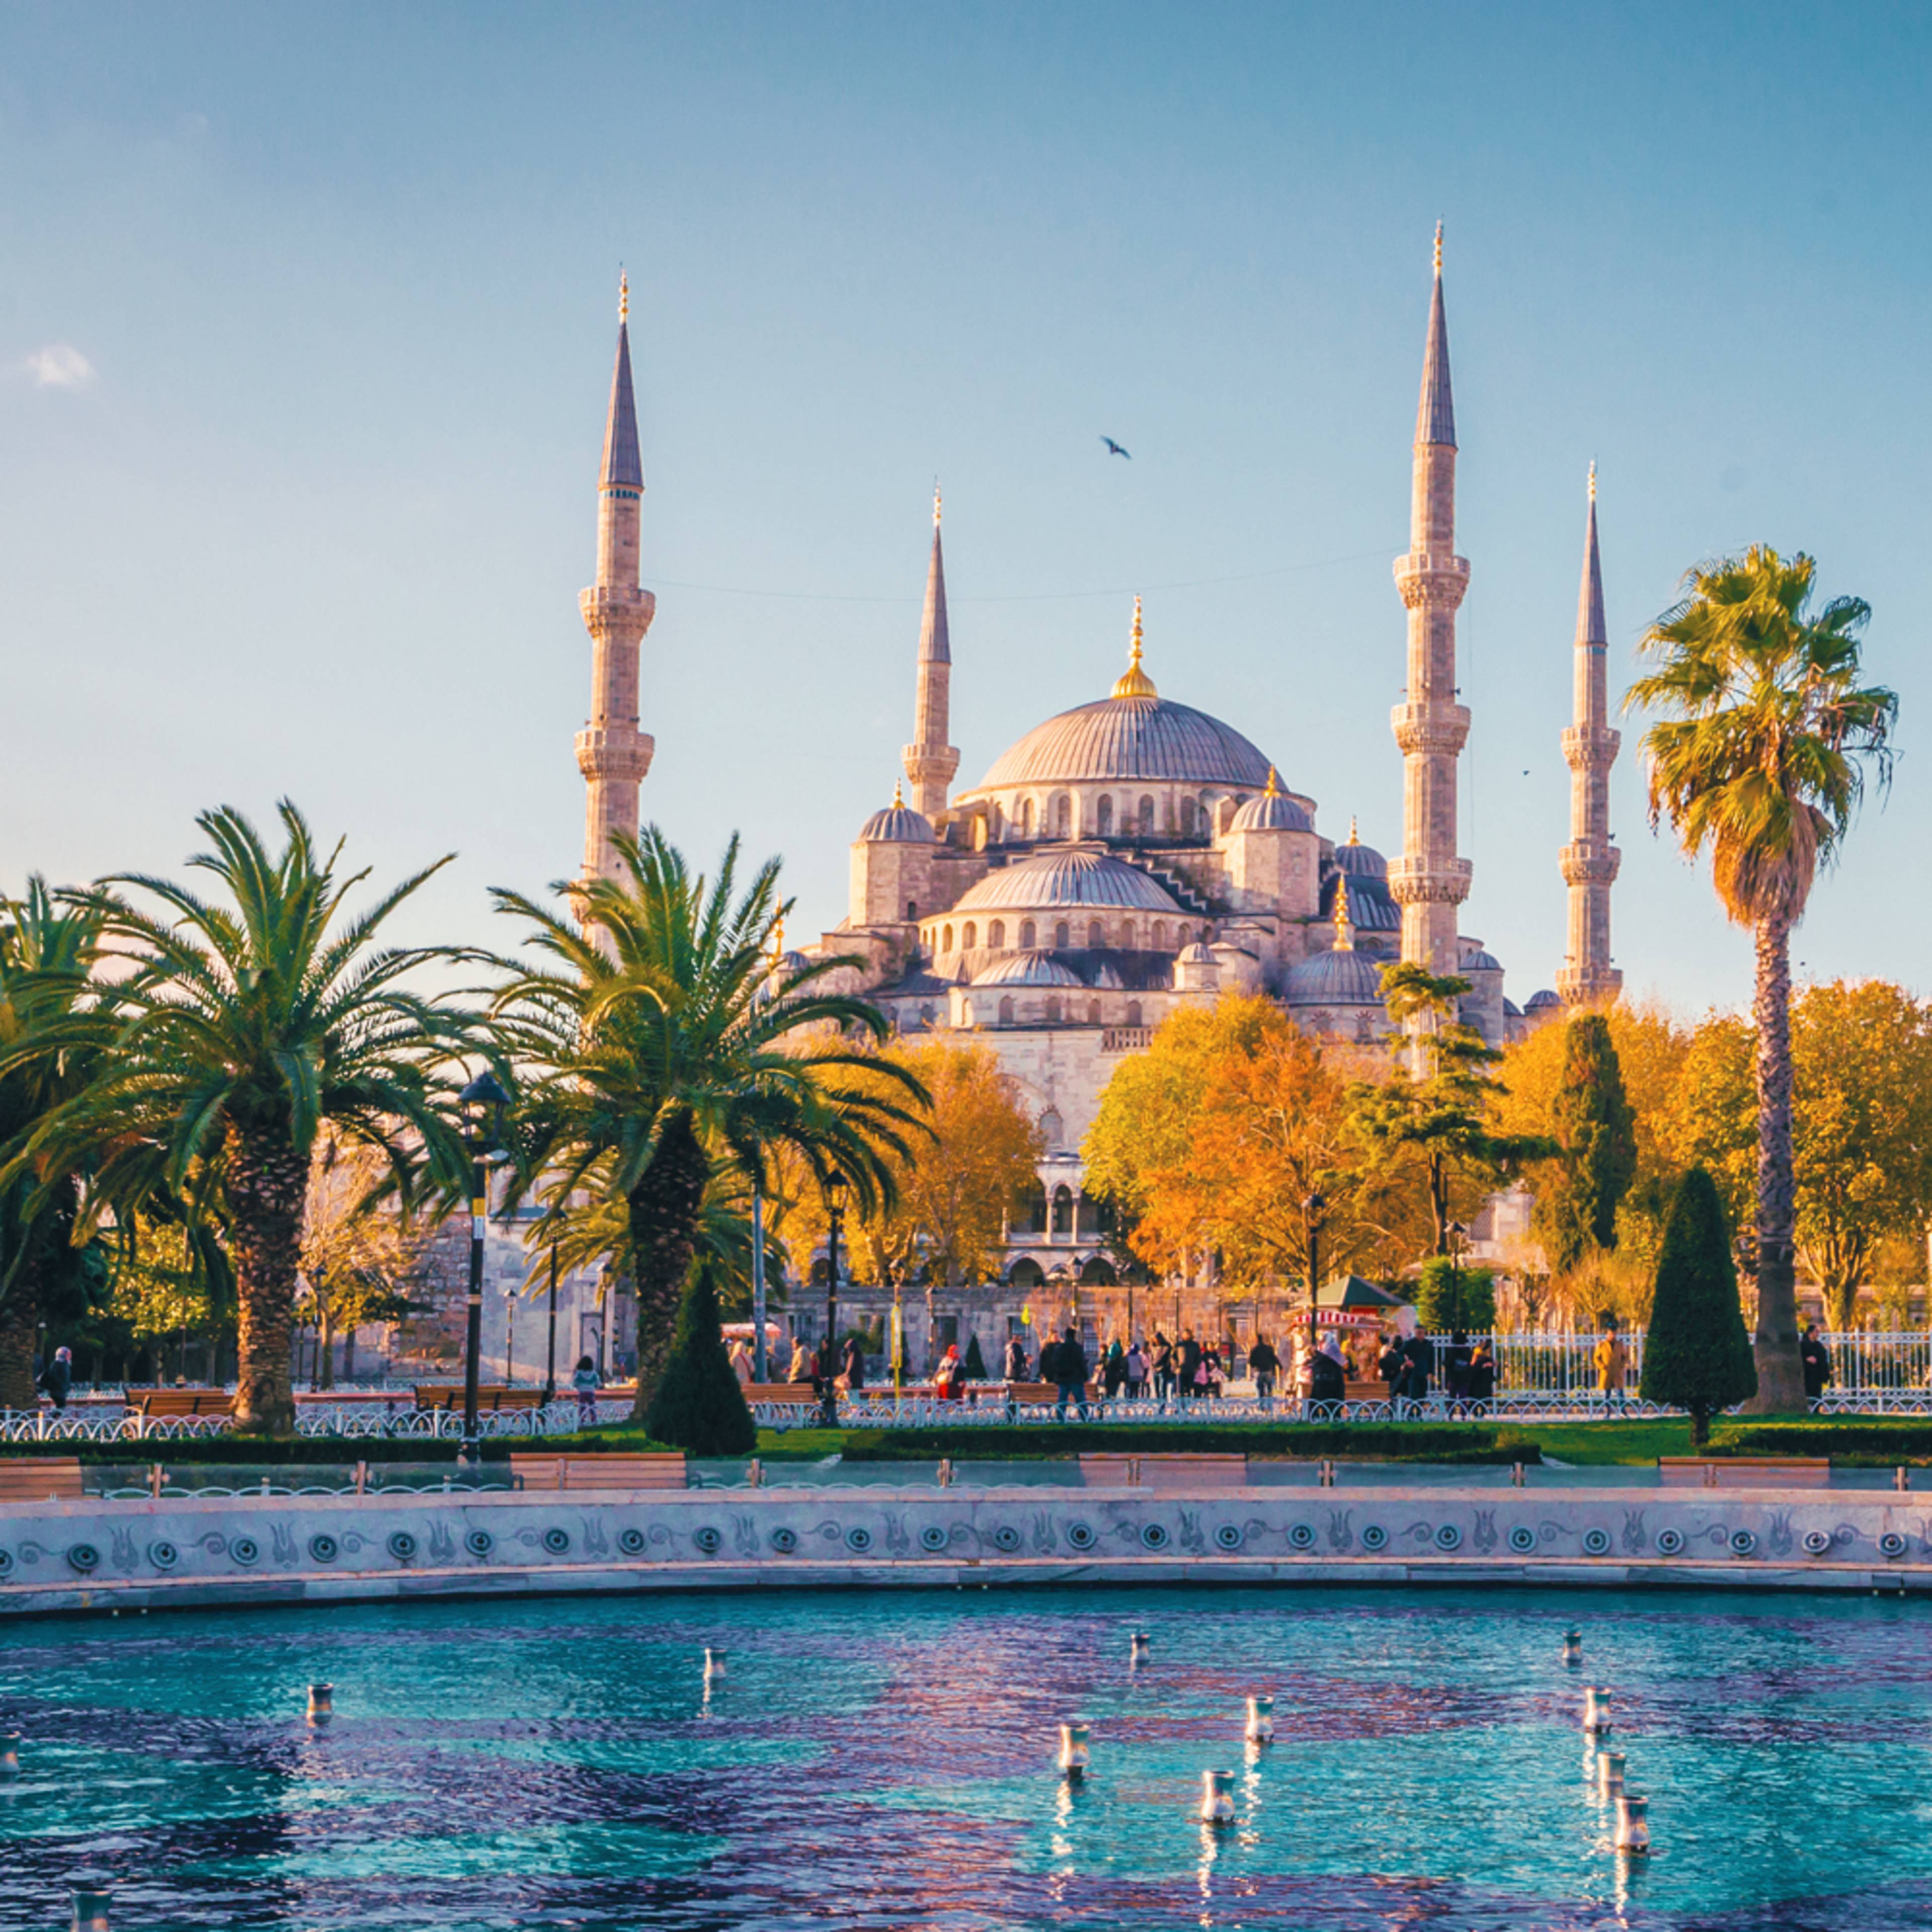 Design your perfect city tour with a local expert in Turkey